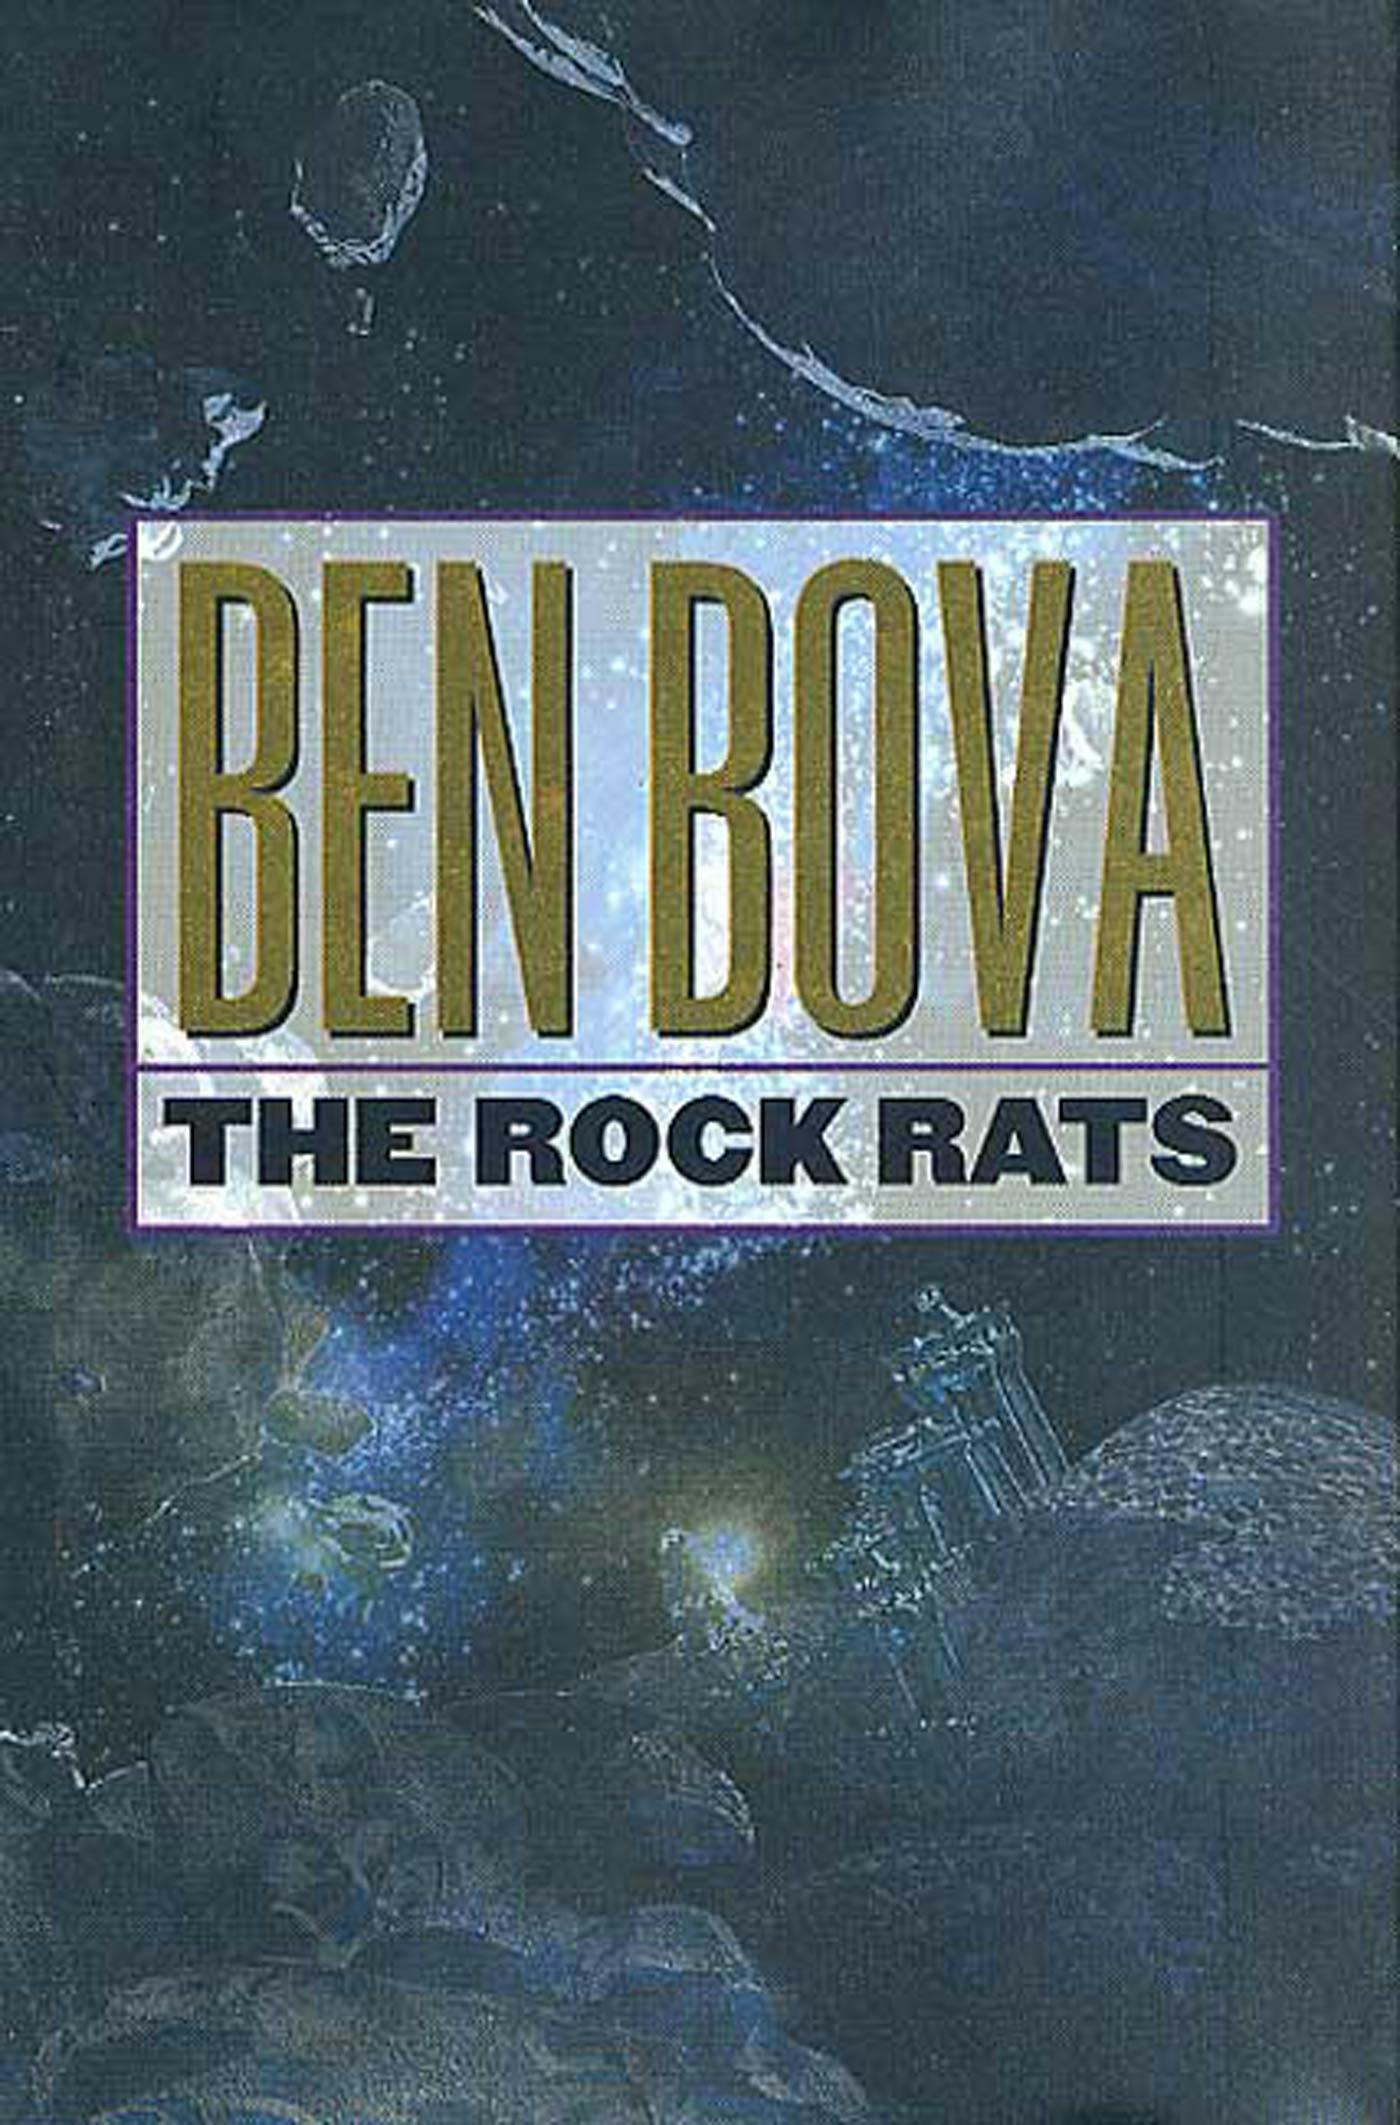 Cover for the book titled as: The Rock Rats